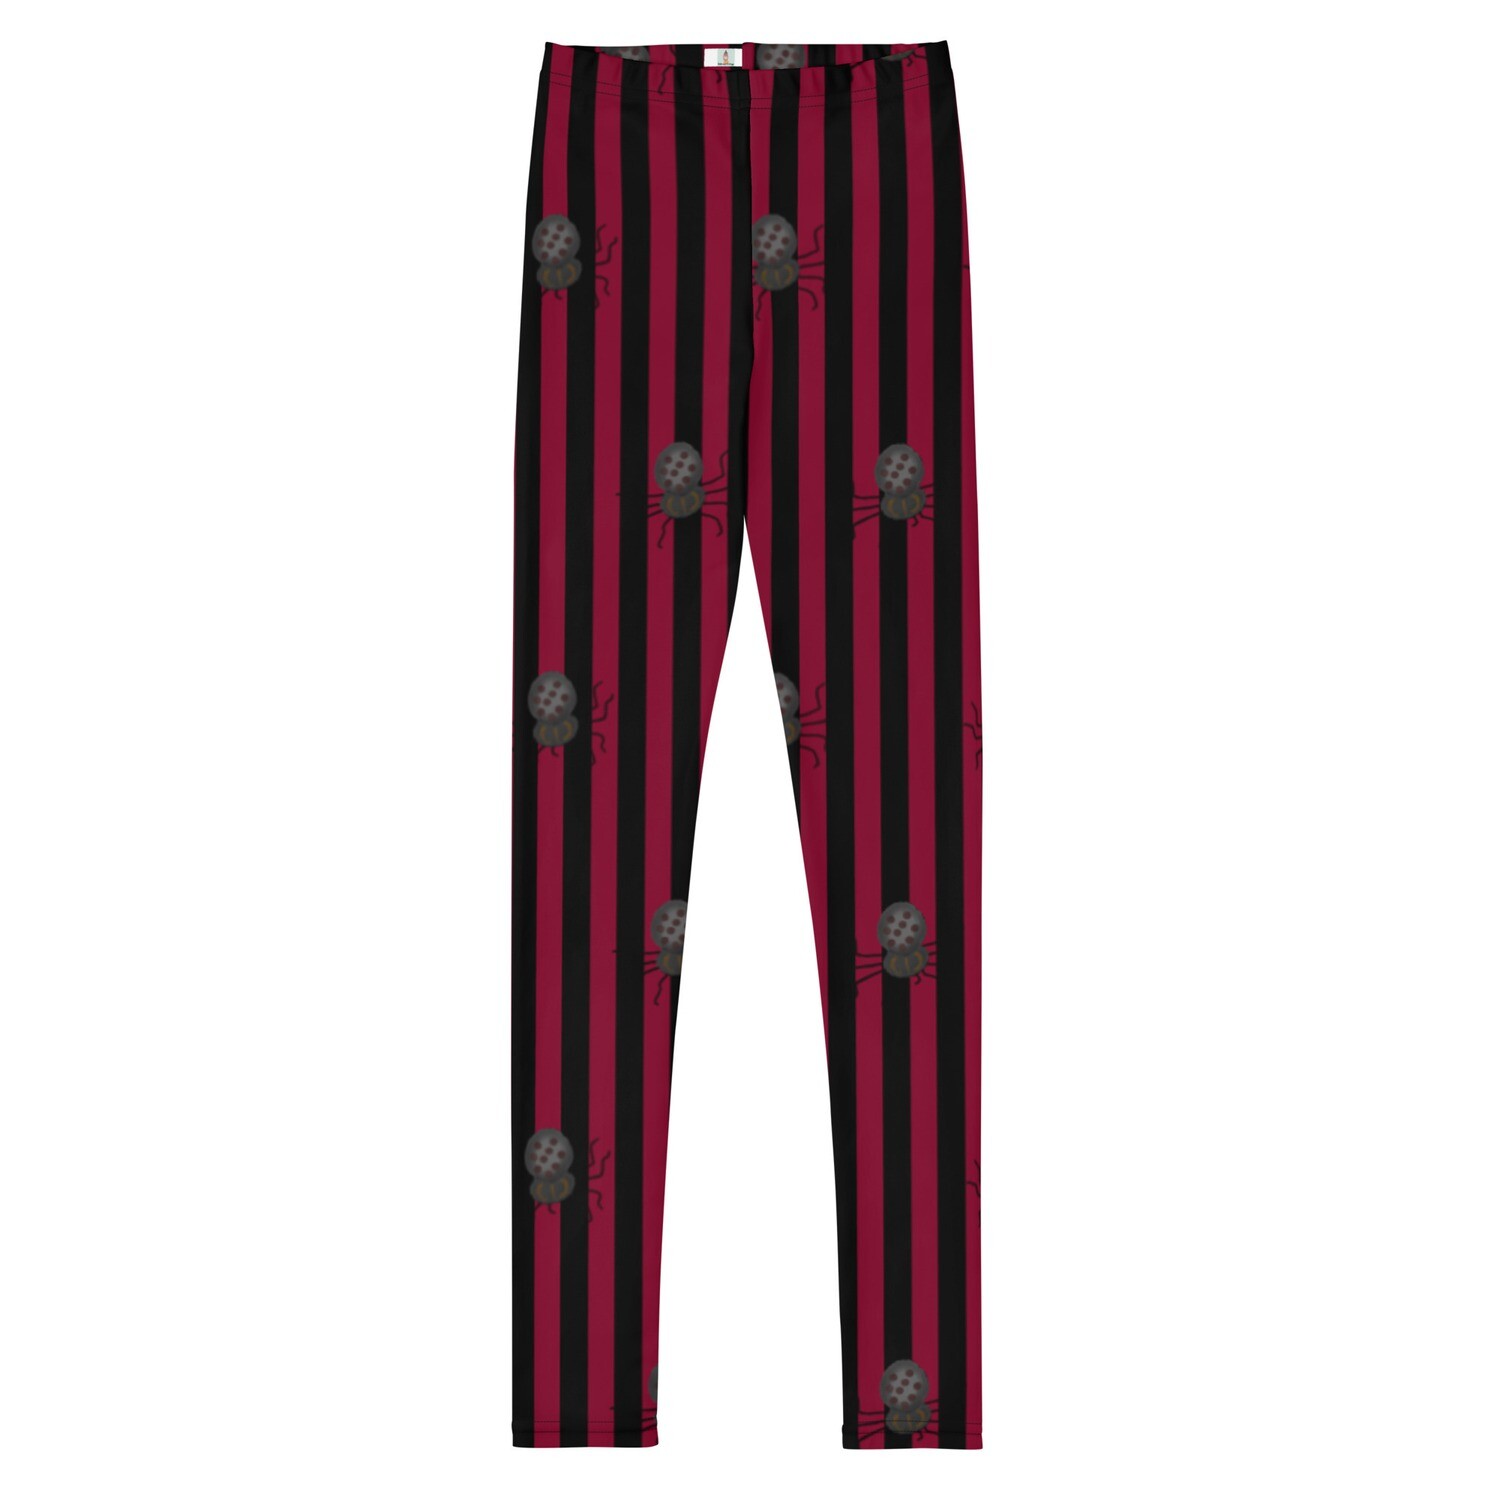 Spider Striped Youth Leggings